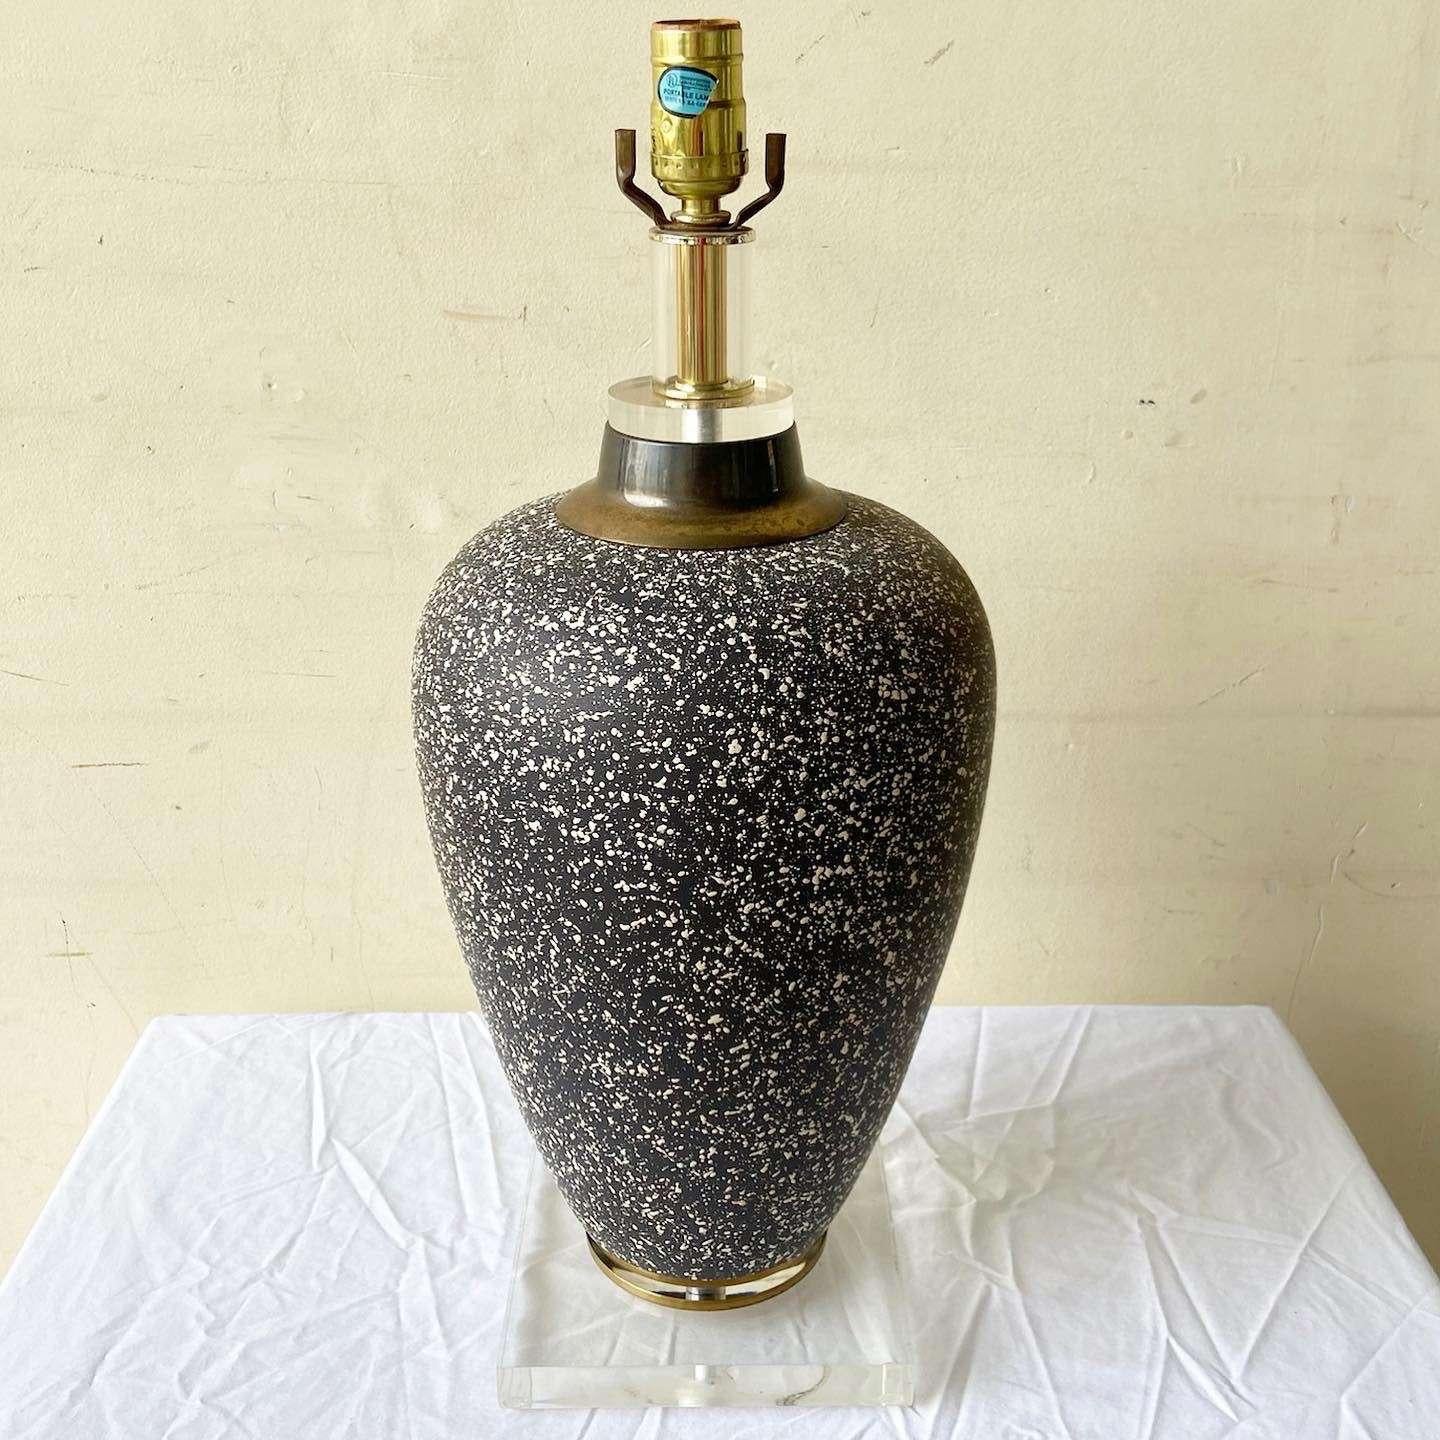 Exceptional vintage Postmodern ceramic table lamp. Features a black and white speckled finish with a lucite base.
